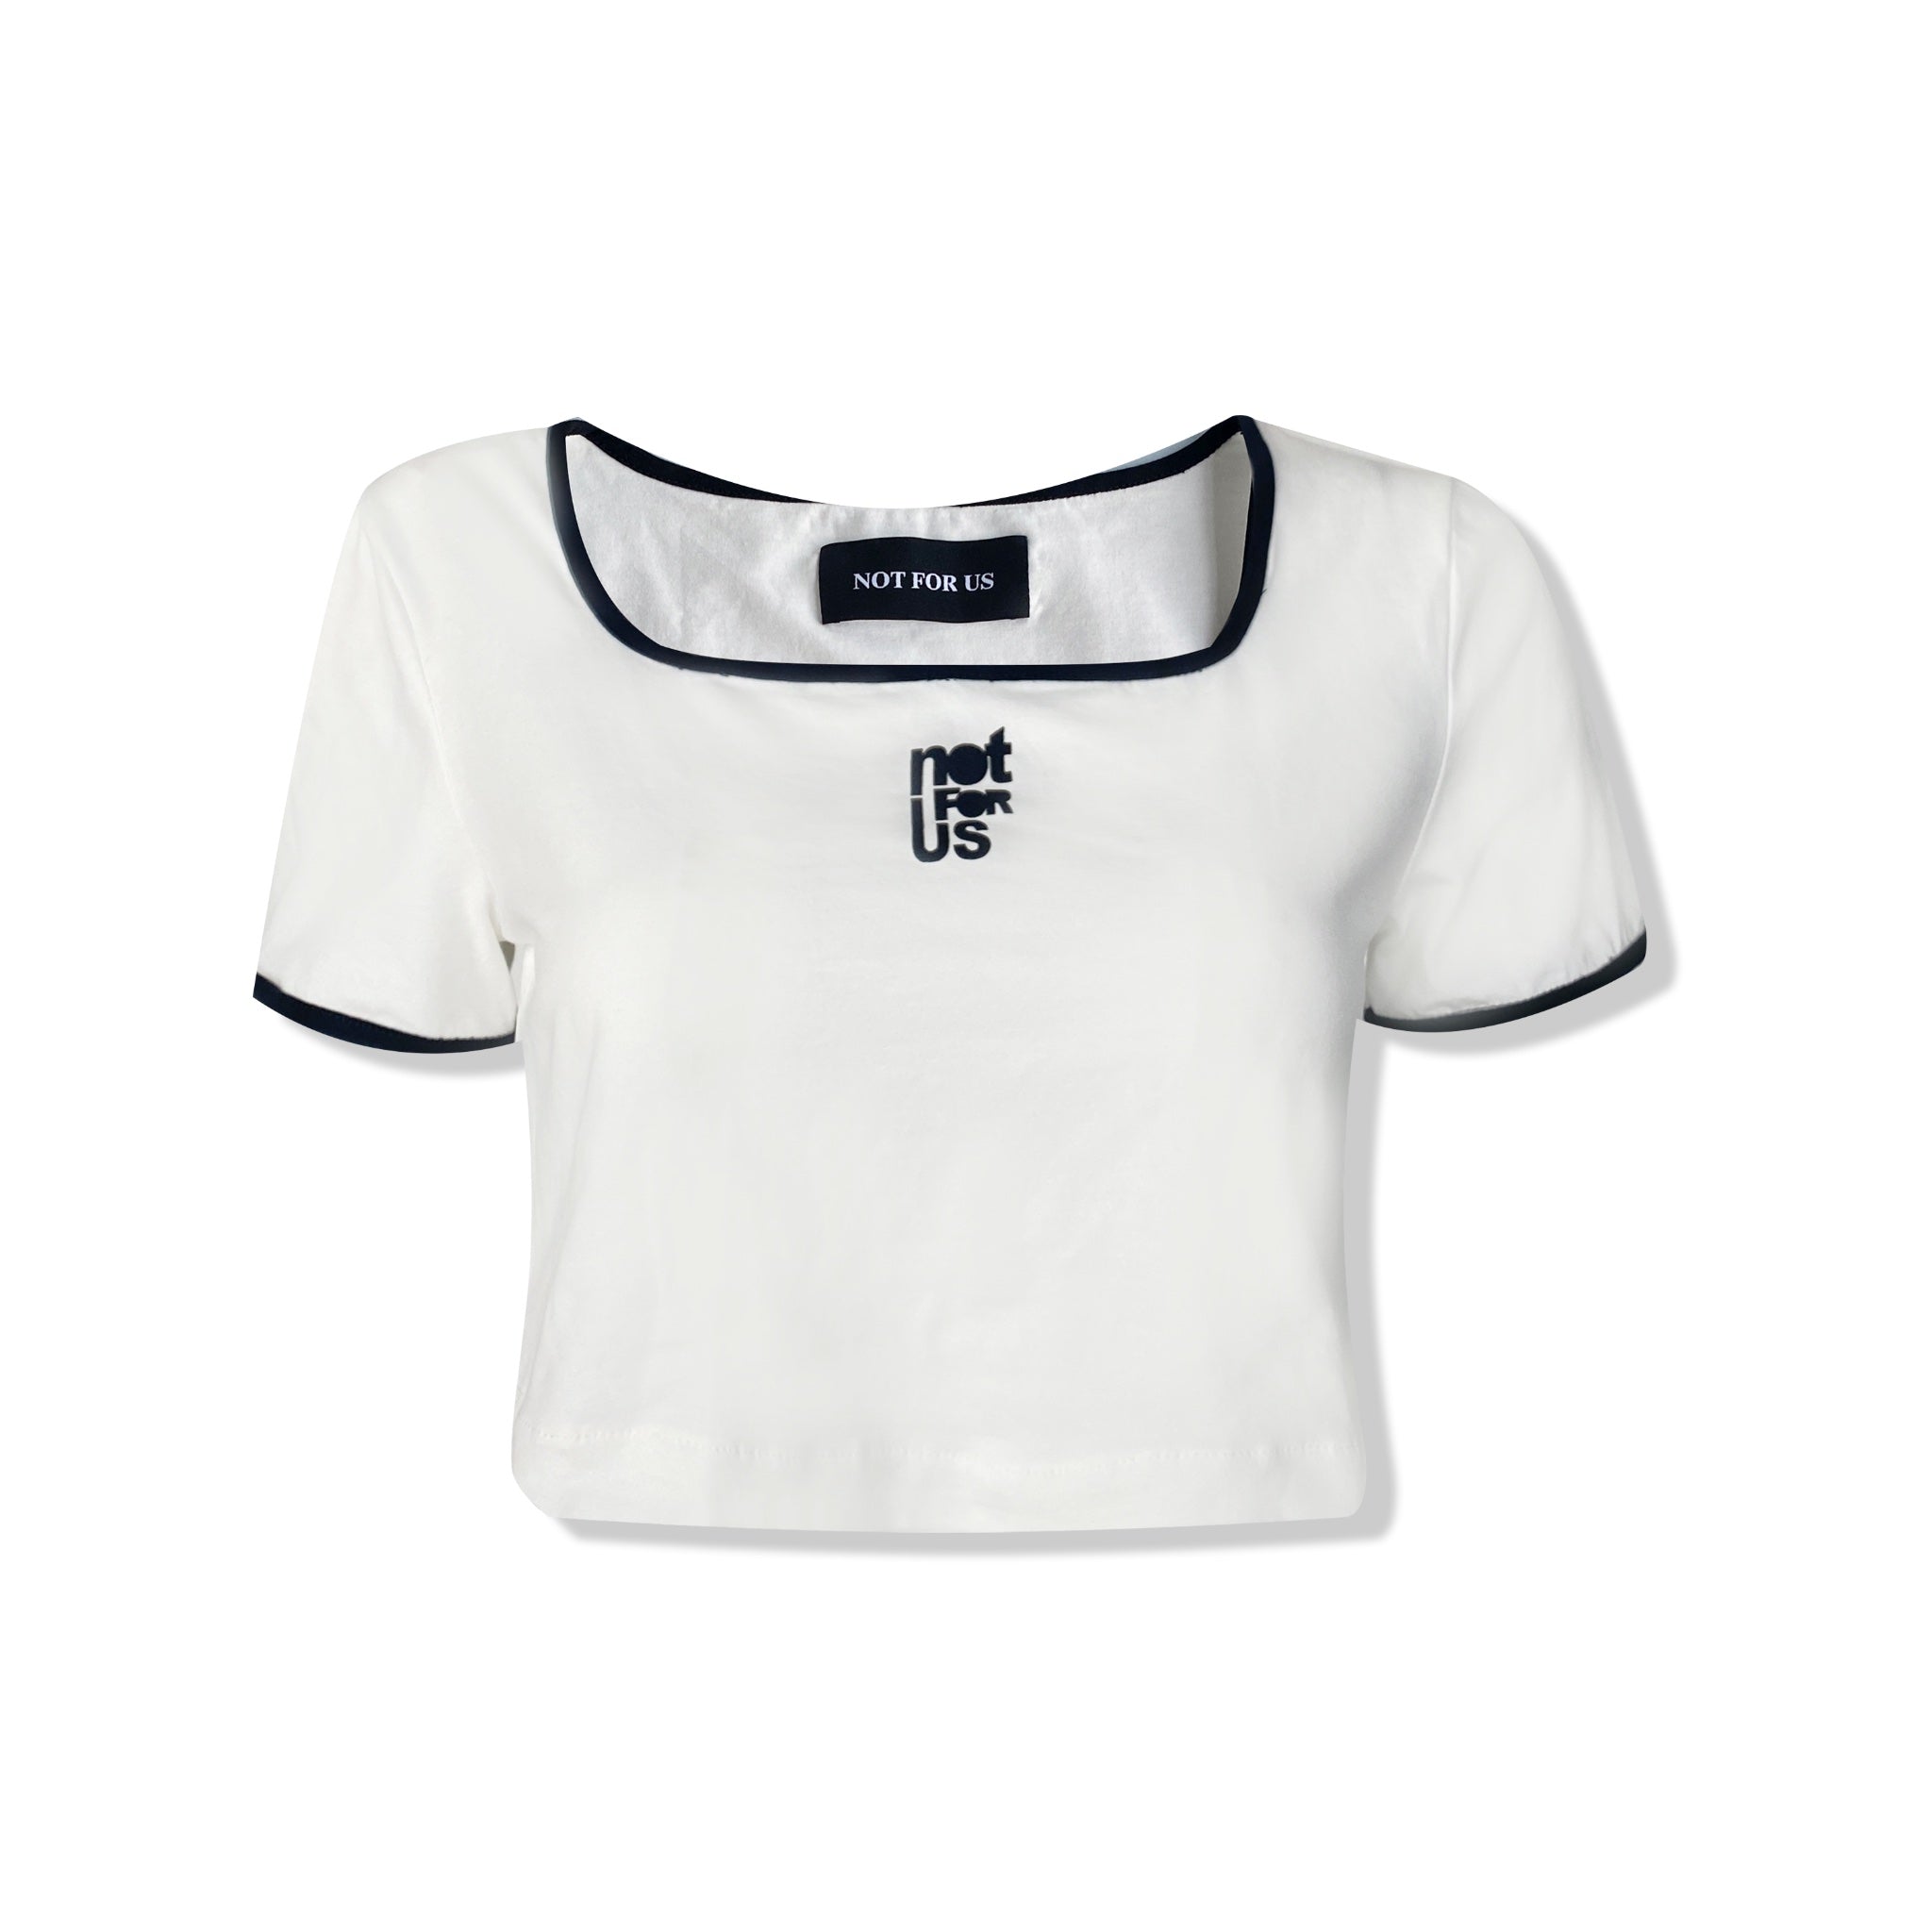 NOT FOR US White T-shirt With Black Border Logo | MADA IN CHINA